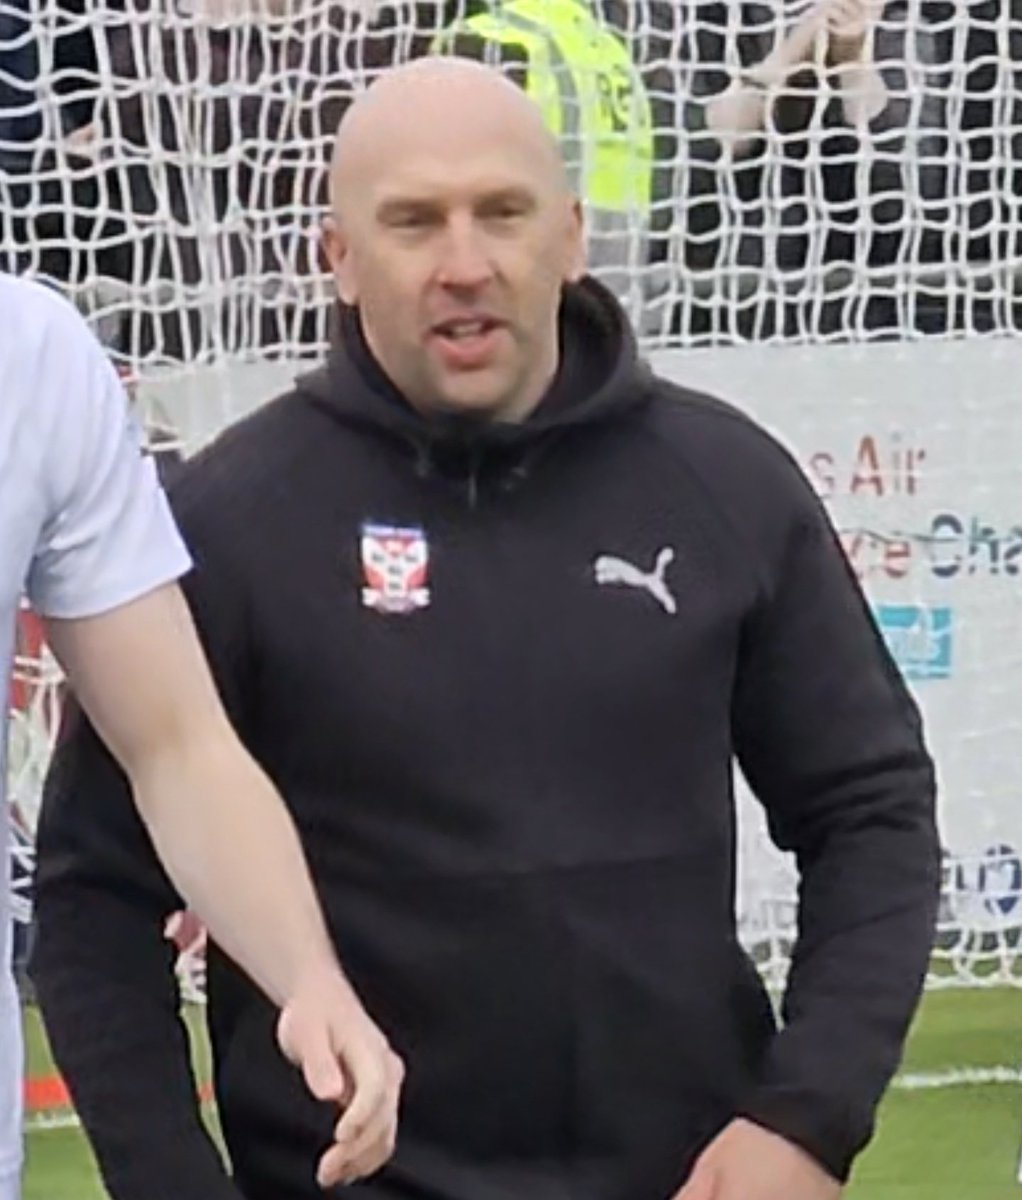 Job done ! Adam Hinshelwood gives us thoughts on the Solihull match and looks forward to pushing on to greater things next season... jorvikradio.com/podcasts/york-…